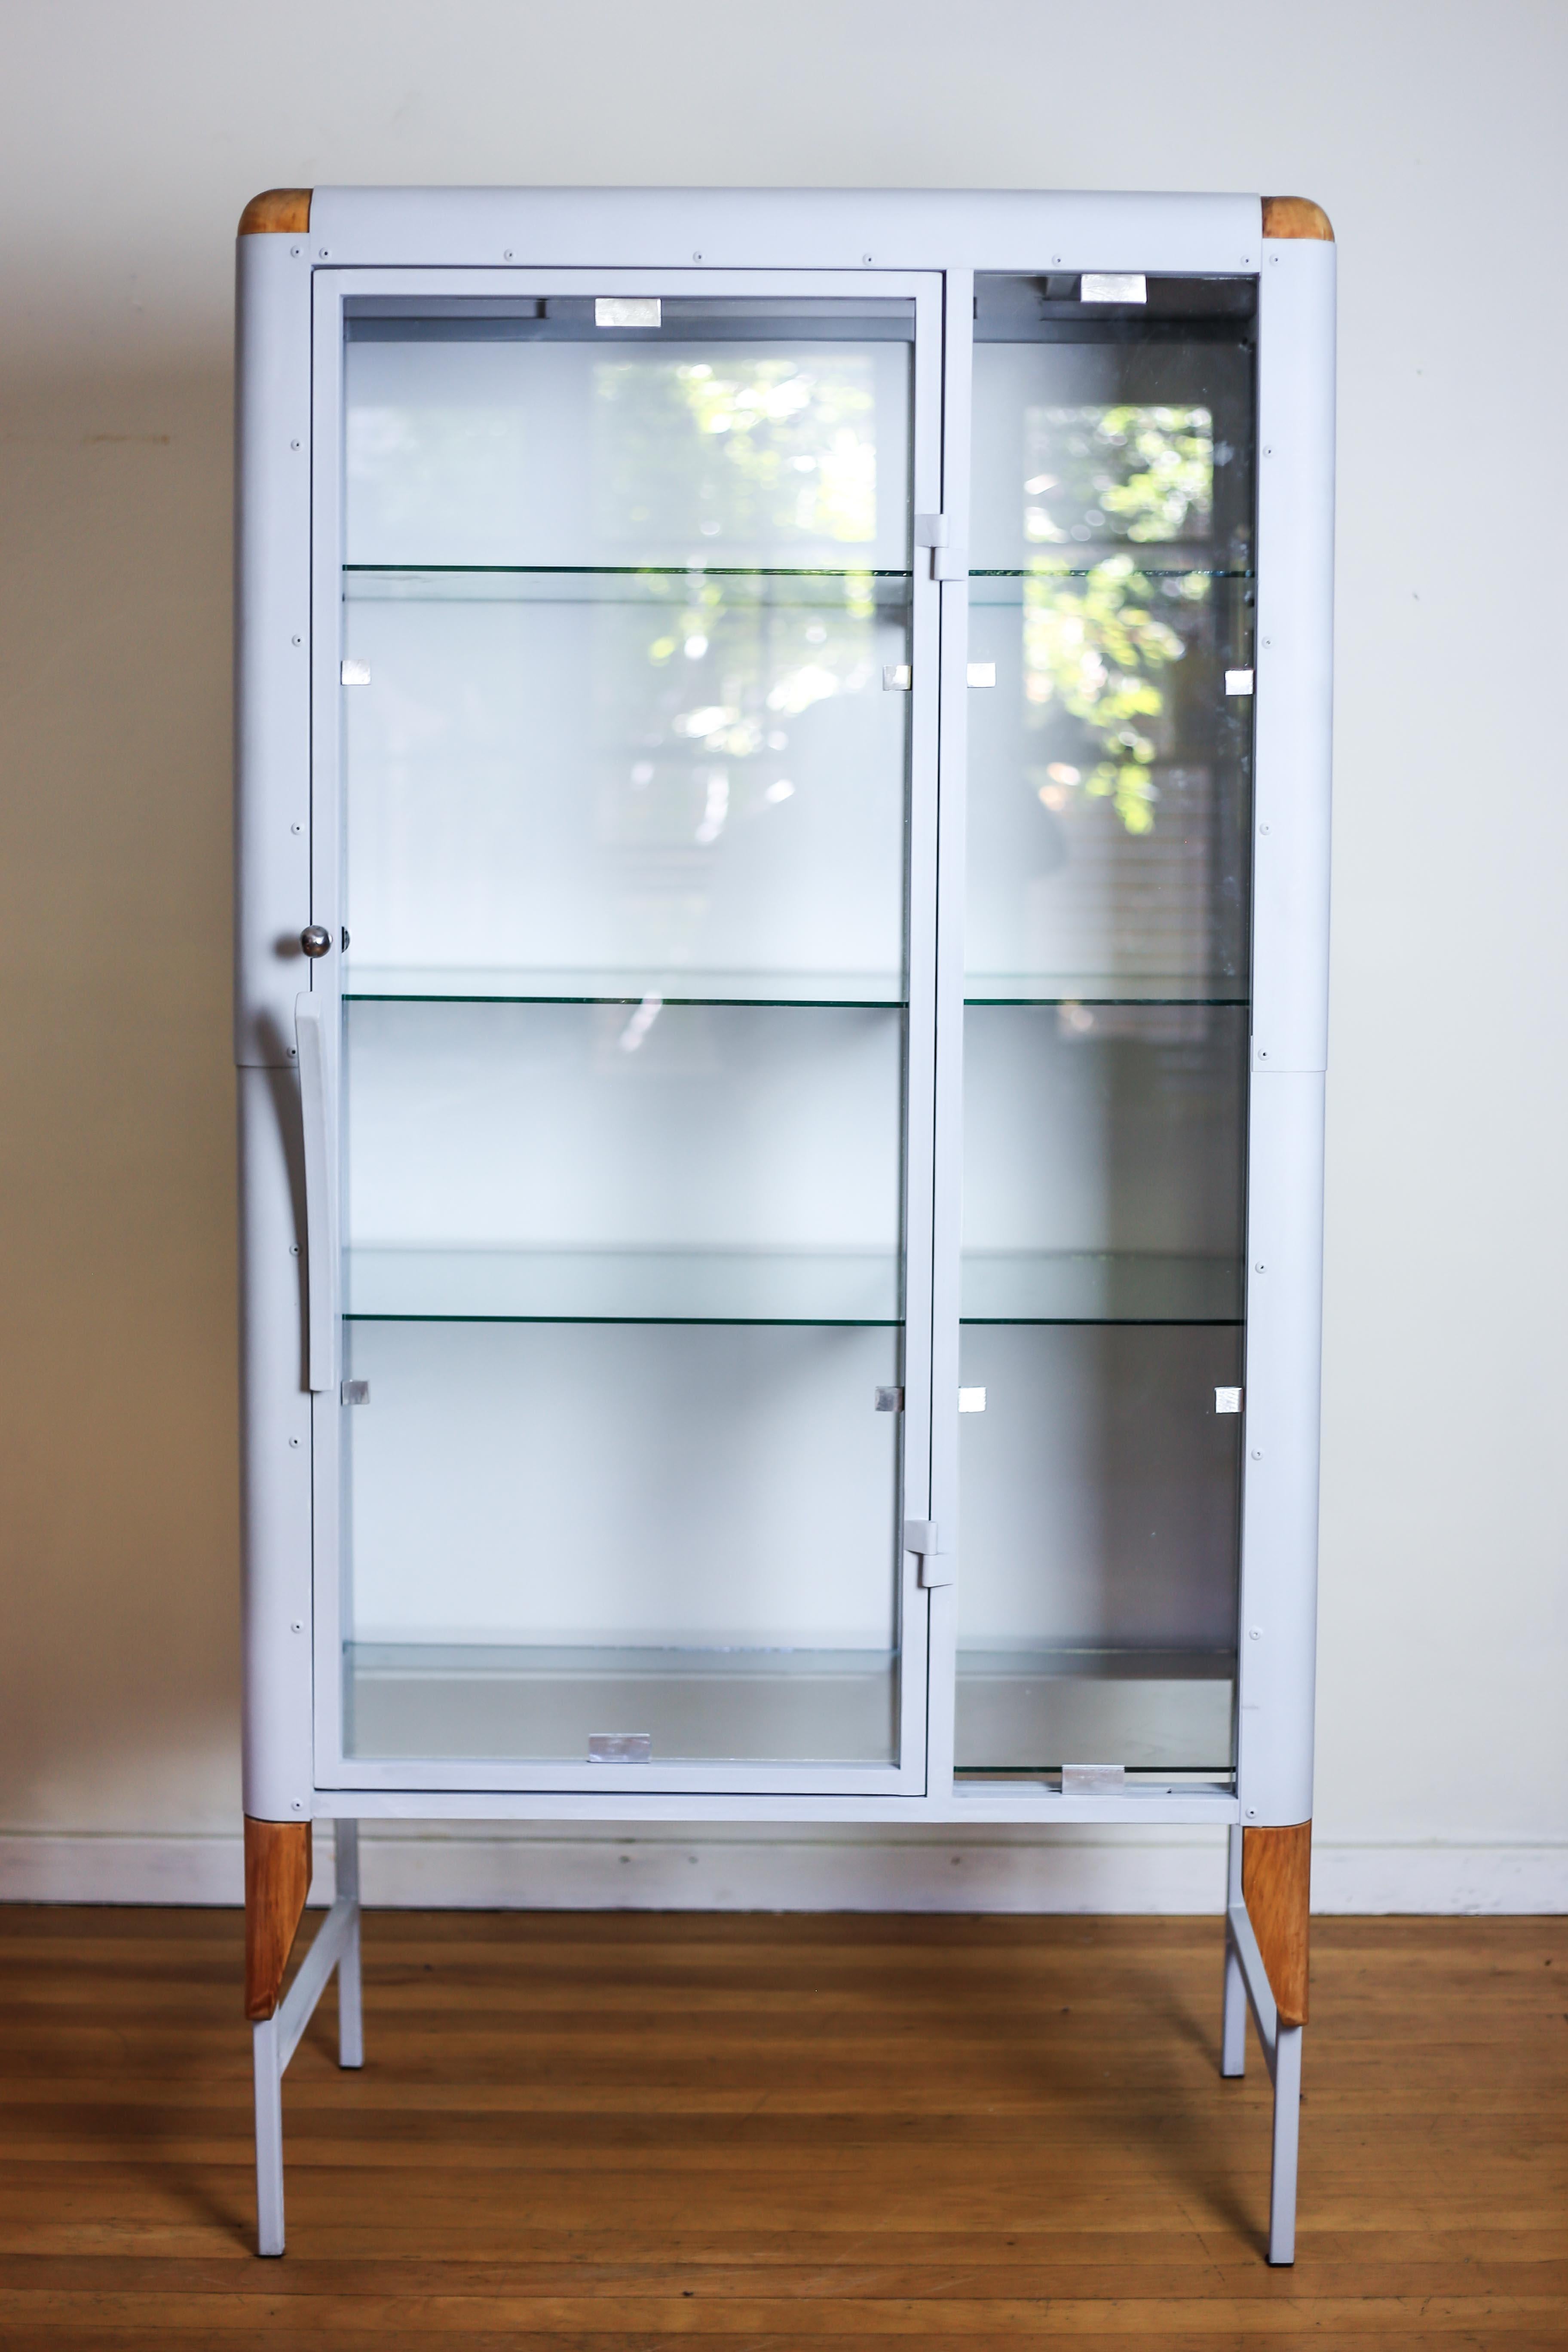 A limited edition, handmade to order cabinets by South African furniture designer, Glen Napier. This display case is a modern take on medical cabinets of the early previous century. Like it's predecessors, it is predominantly made of steel and